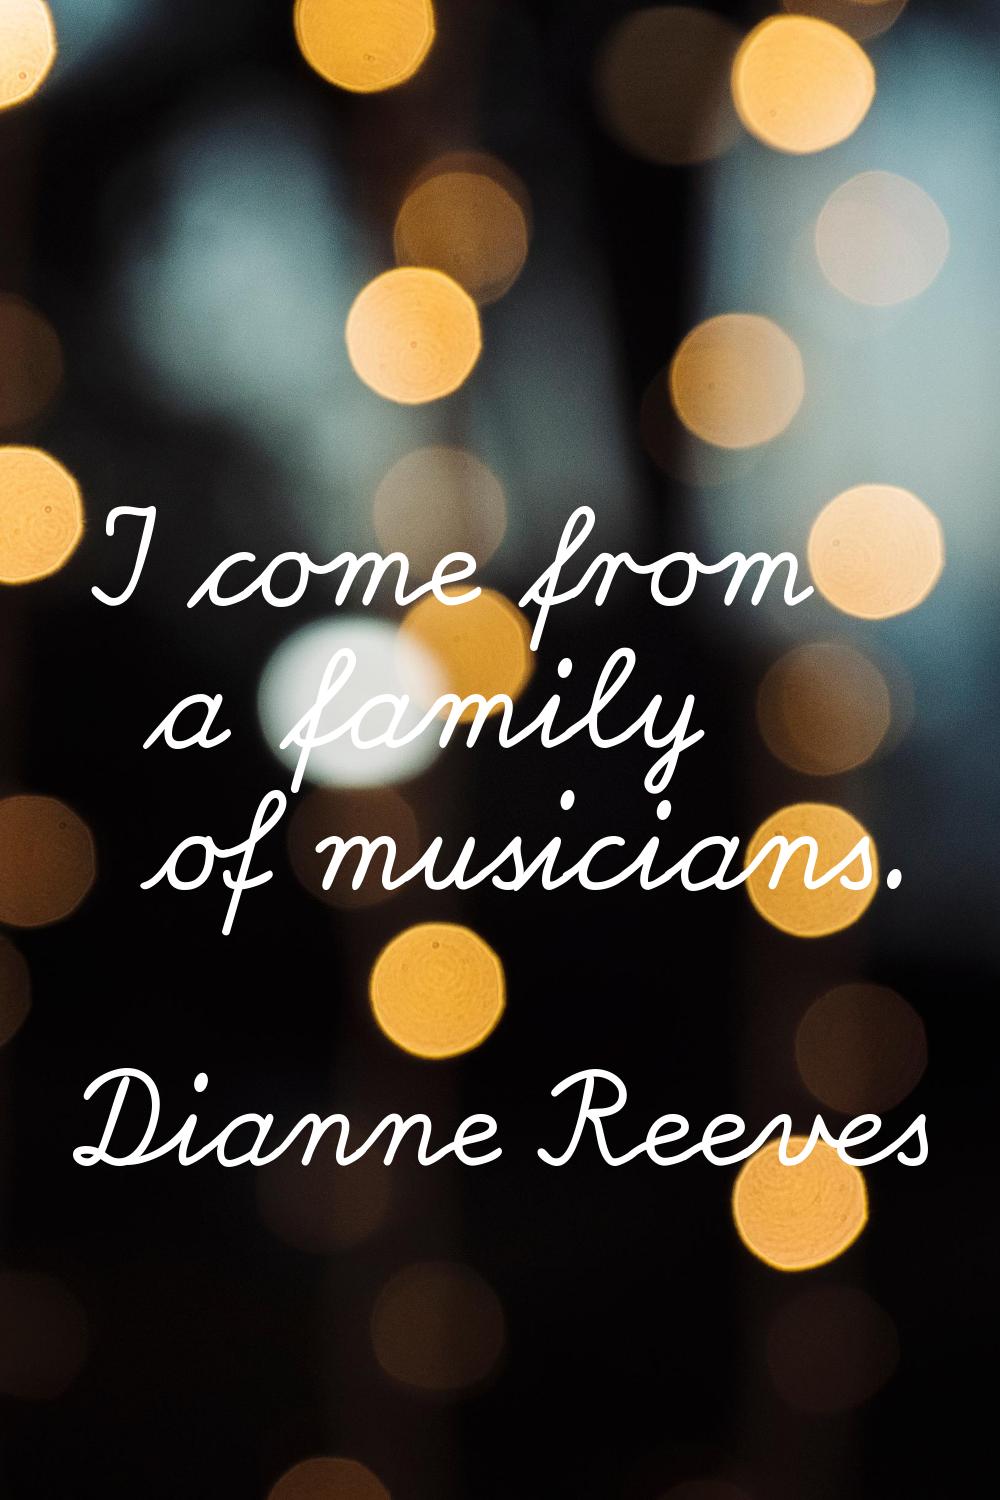 I come from a family of musicians.